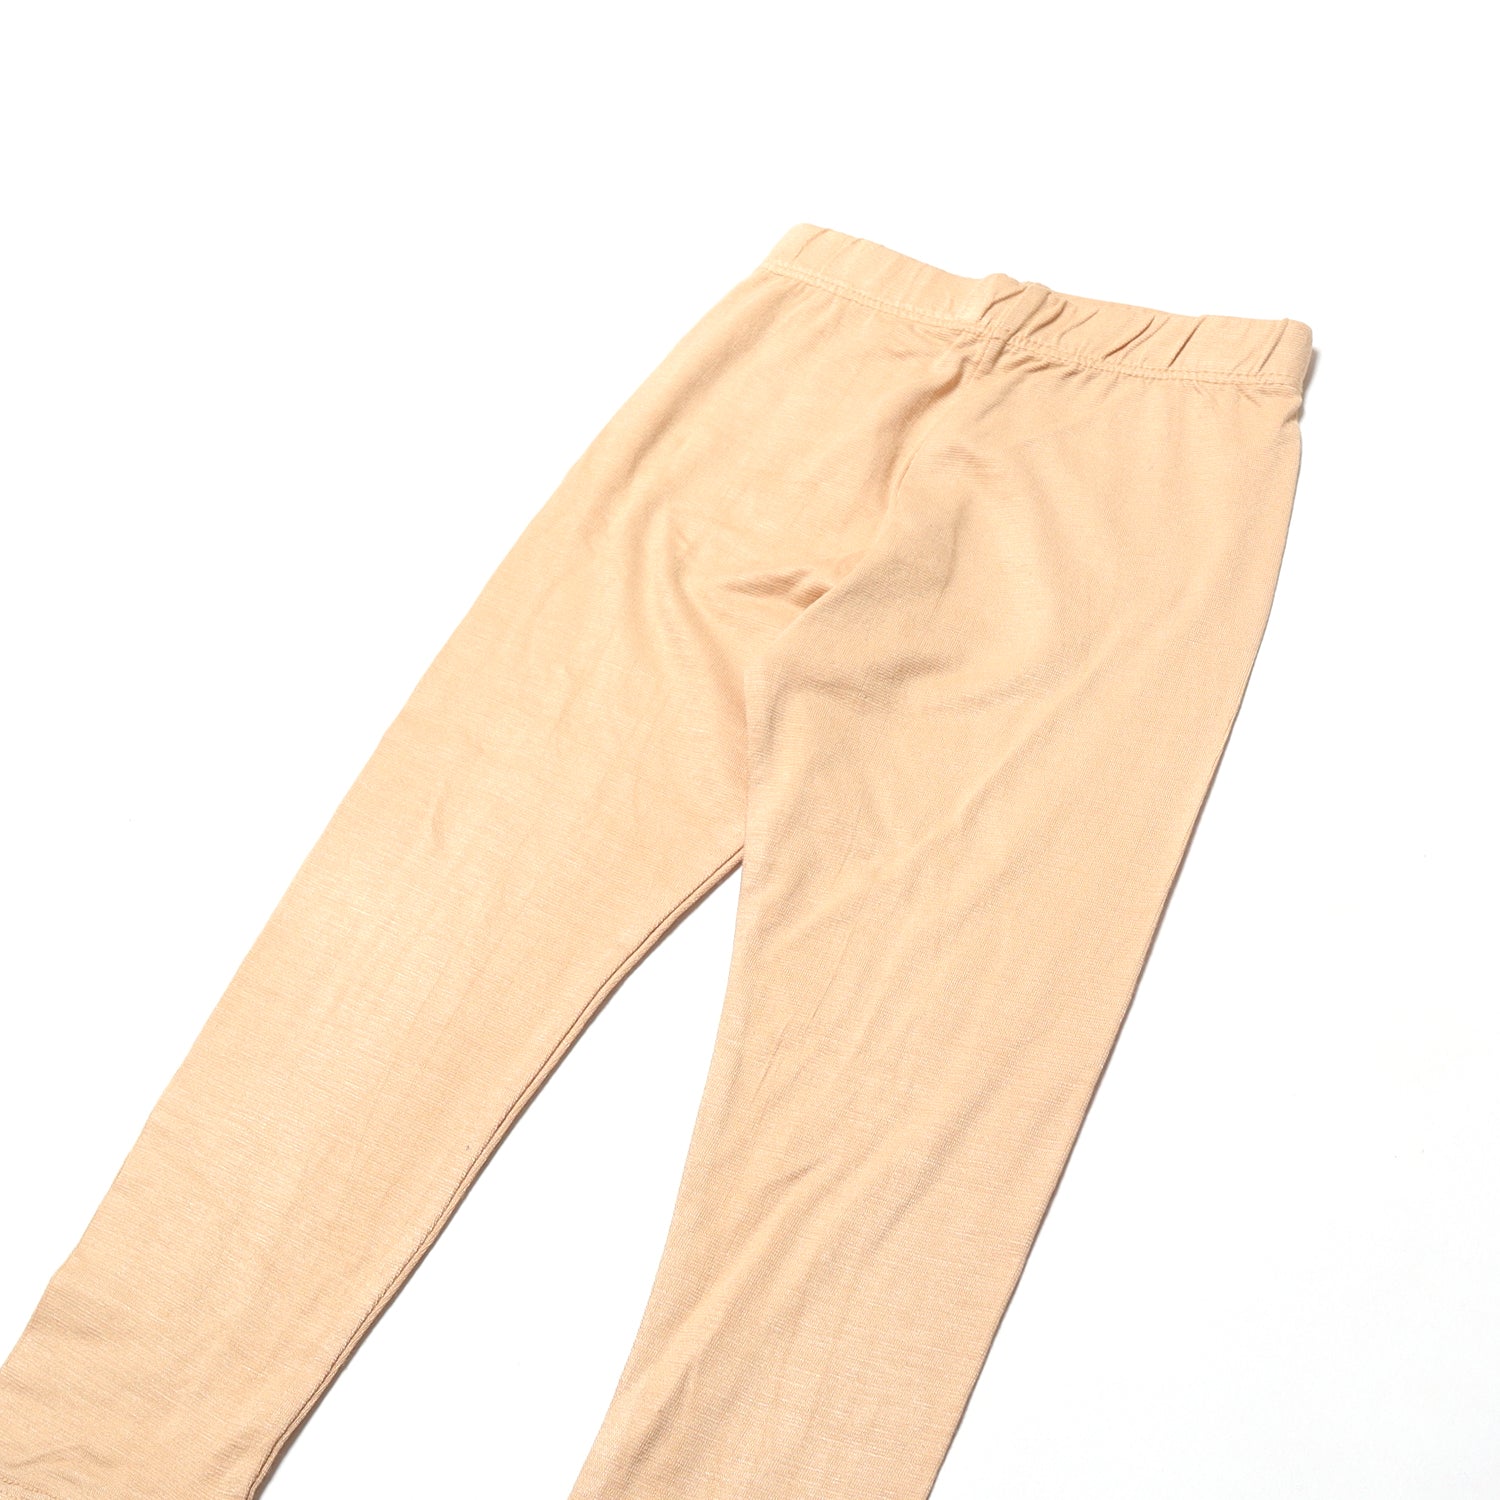 NEW FAWN PLAIN TIGHT PAJAMA FOR GIRLS